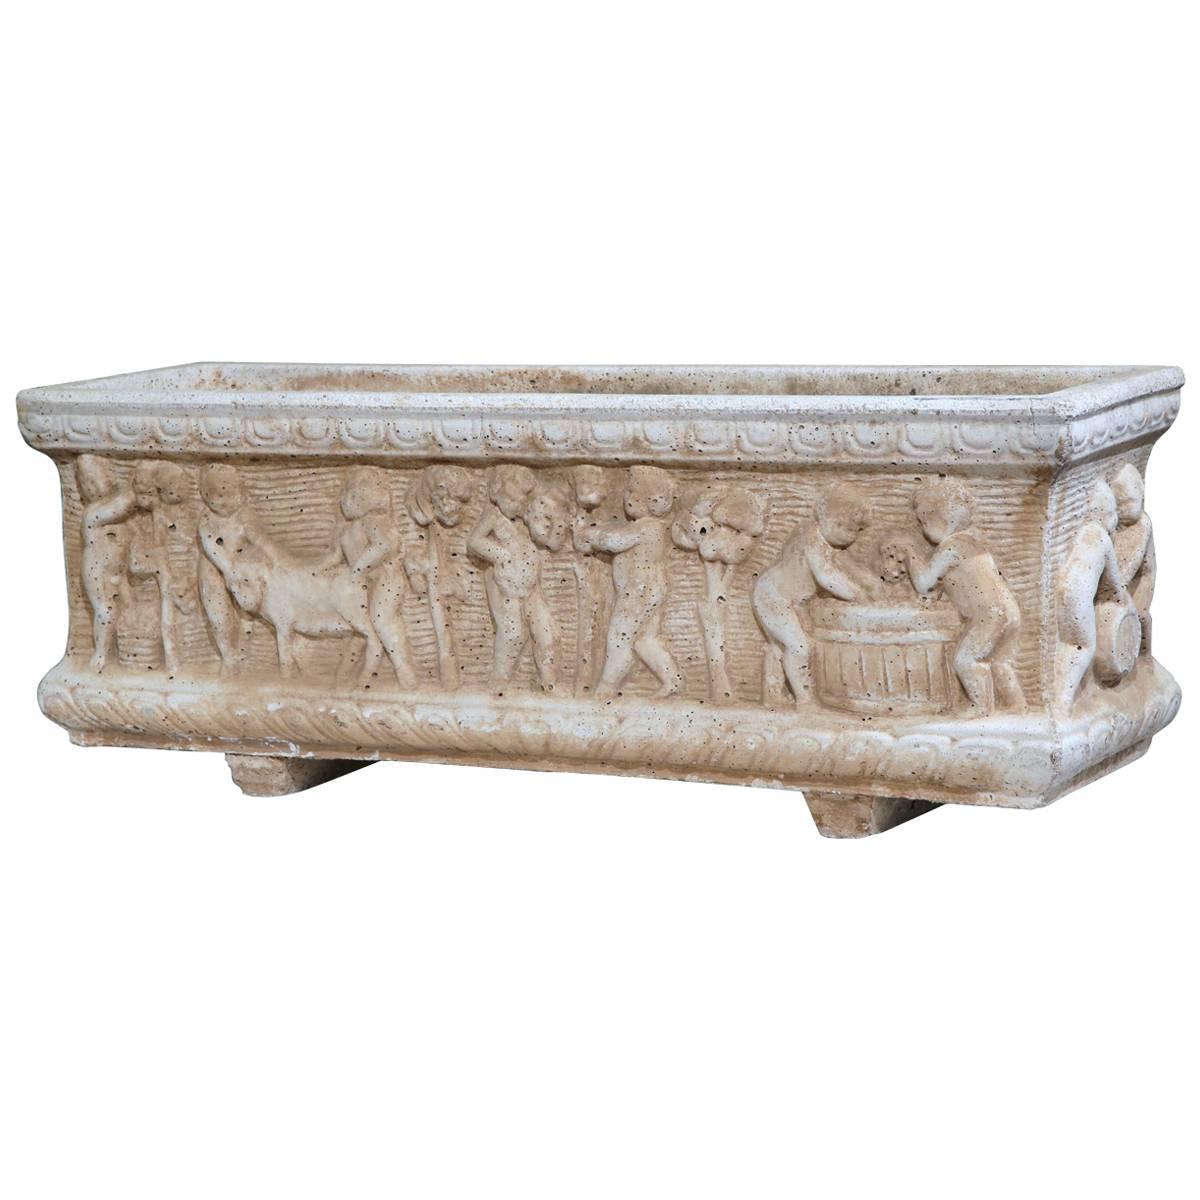 19th Century French Carved Stone Jardinière with Figural Children Motifs